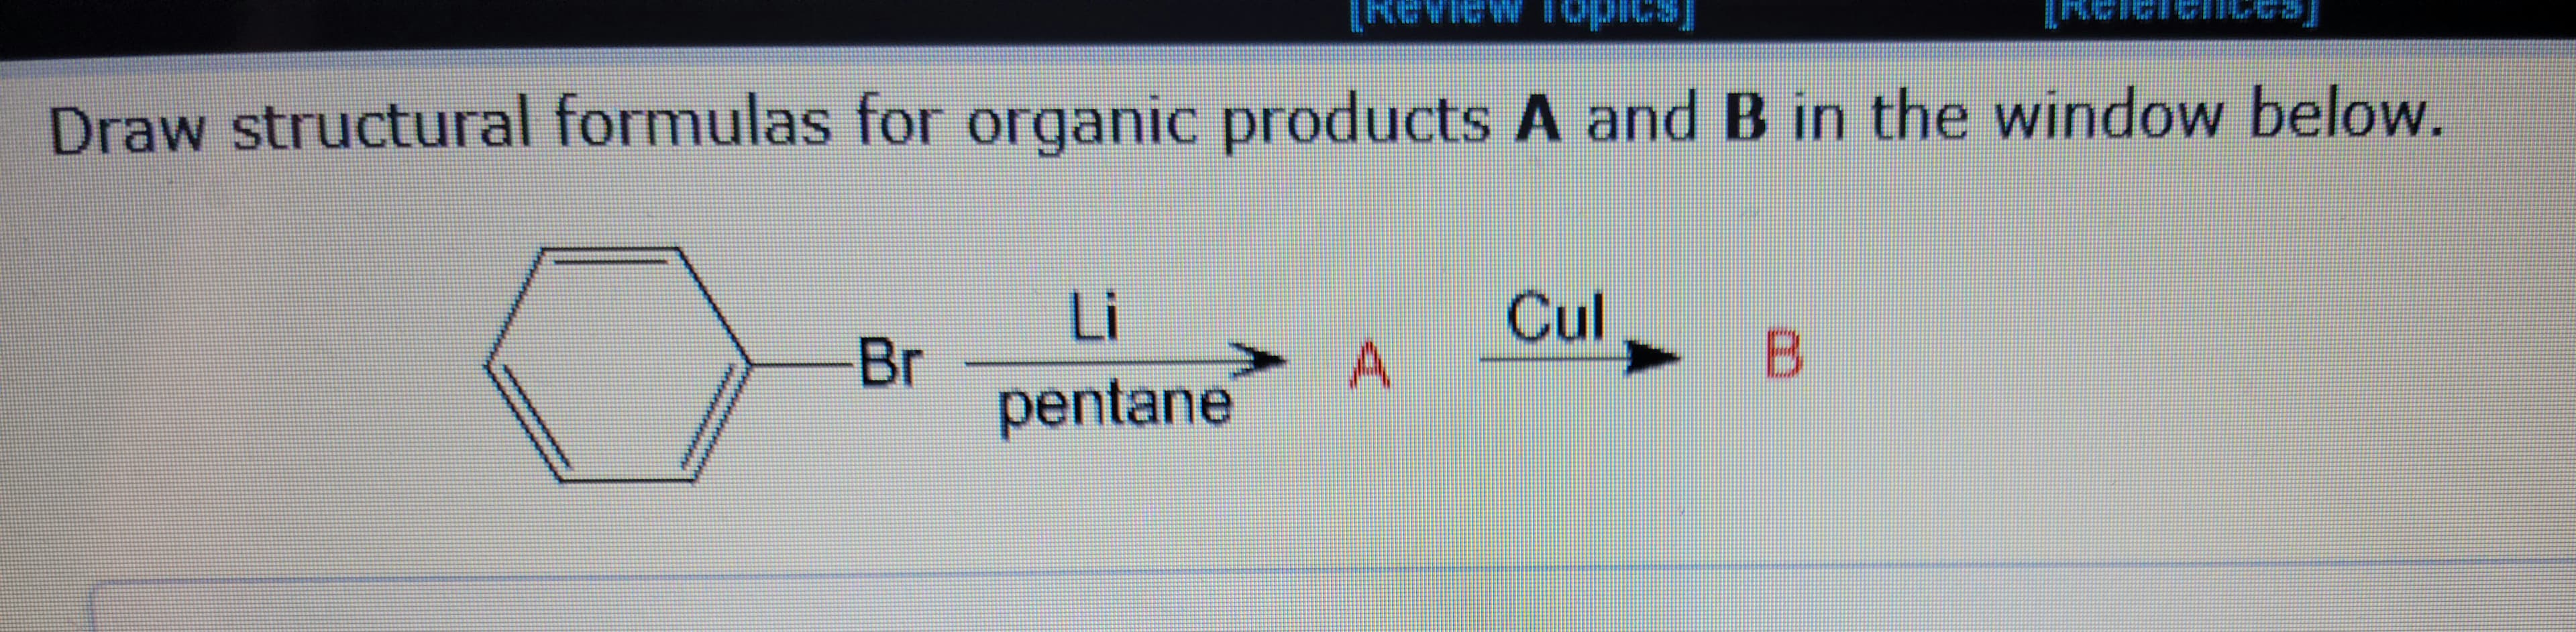 Draw structural formulas for organic products A and B in the window below.
Br
Li
pentane
A
Cul
B